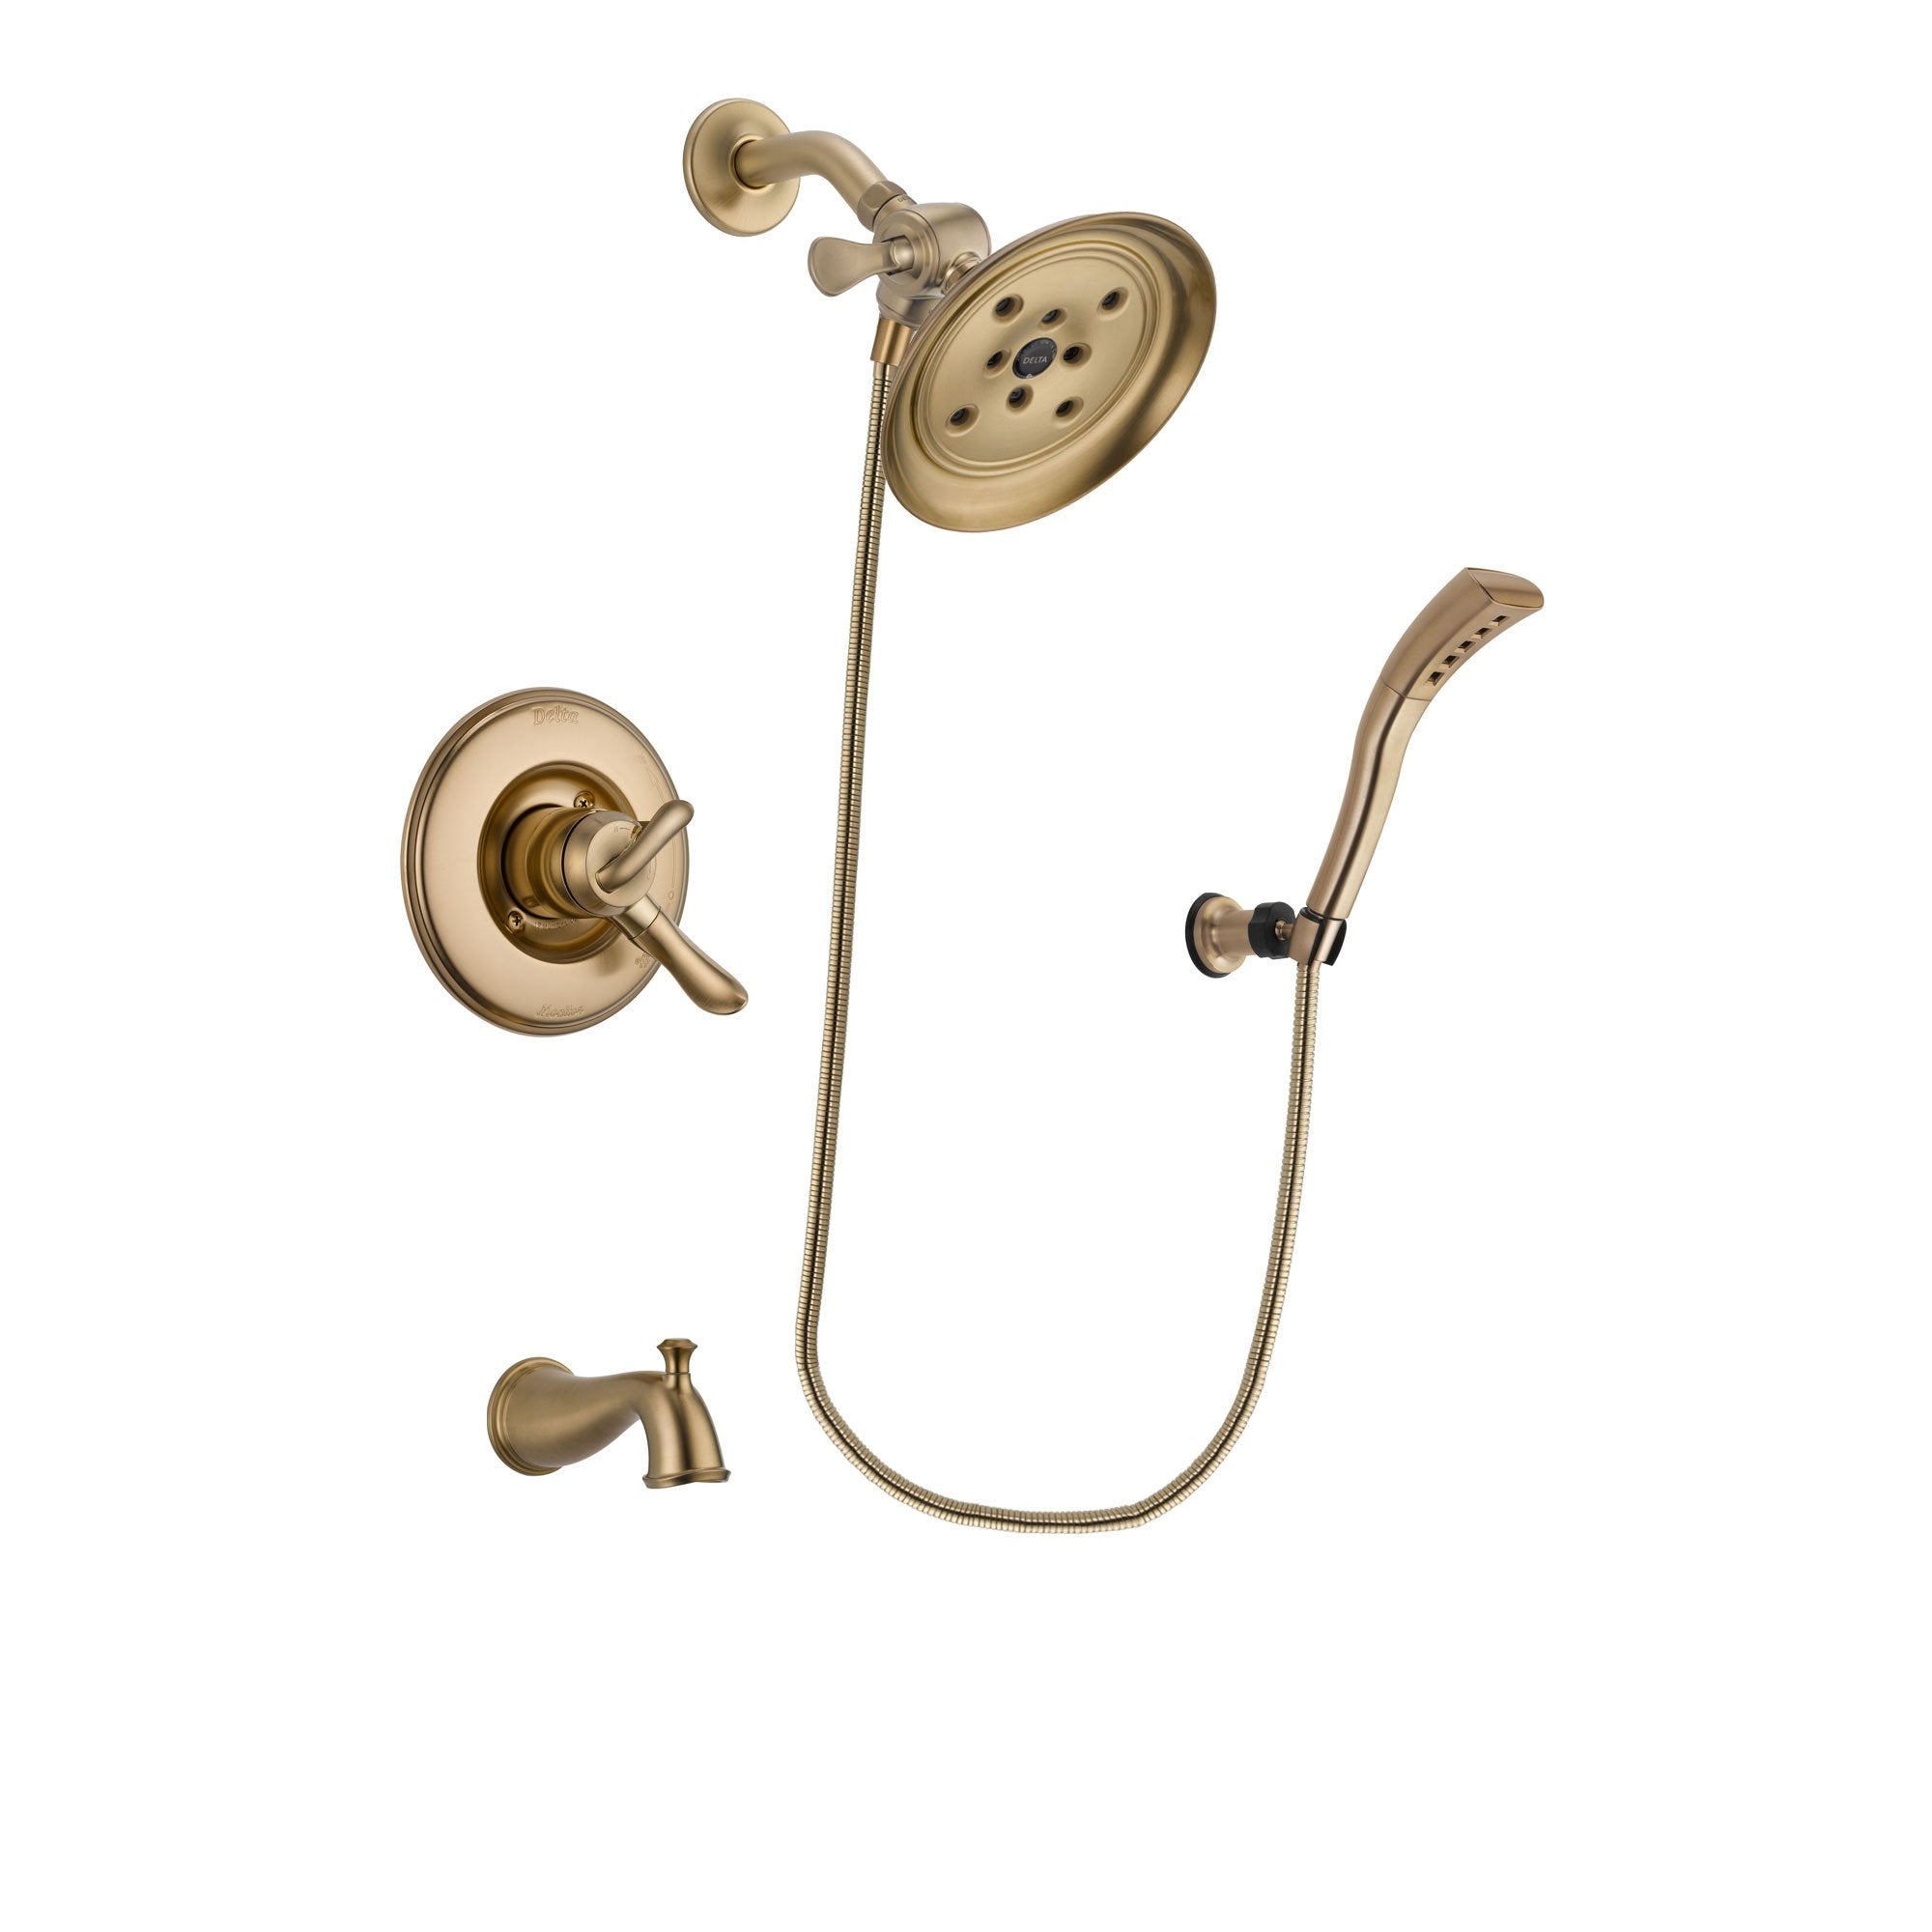 Delta Linden Champagne Bronze Finish Dual Control Tub and Shower Faucet System Package with Large Rain Shower Head and Modern Wall Mount Personal Handheld Shower Spray Includes Rough-in Valve and Tub Spout DSP3703V